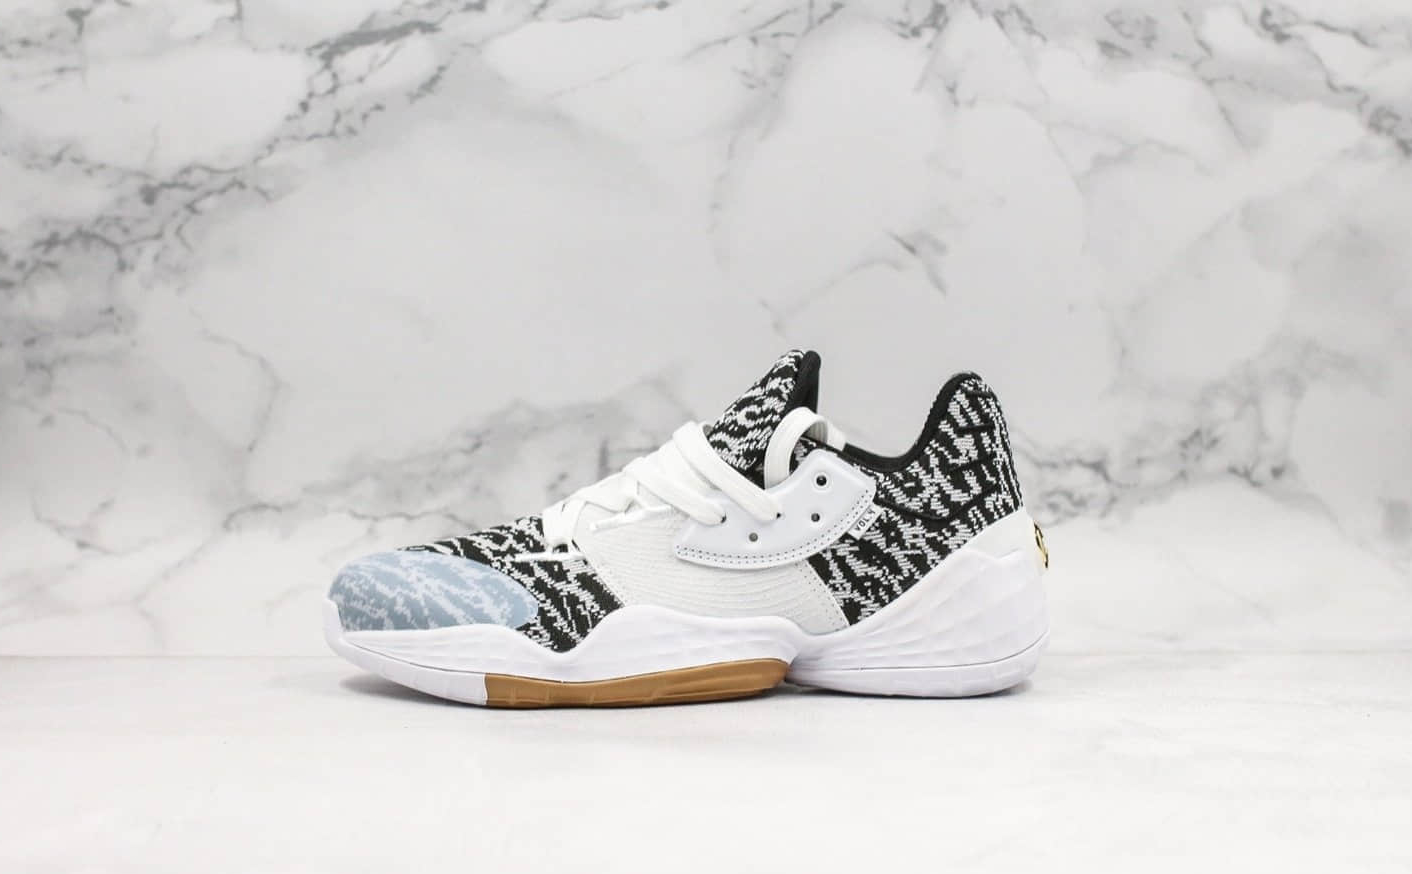 Adidas Harden Vol. 4 'Cookies and Cream' EF1260 - Stylish Performance B-ball Shoes